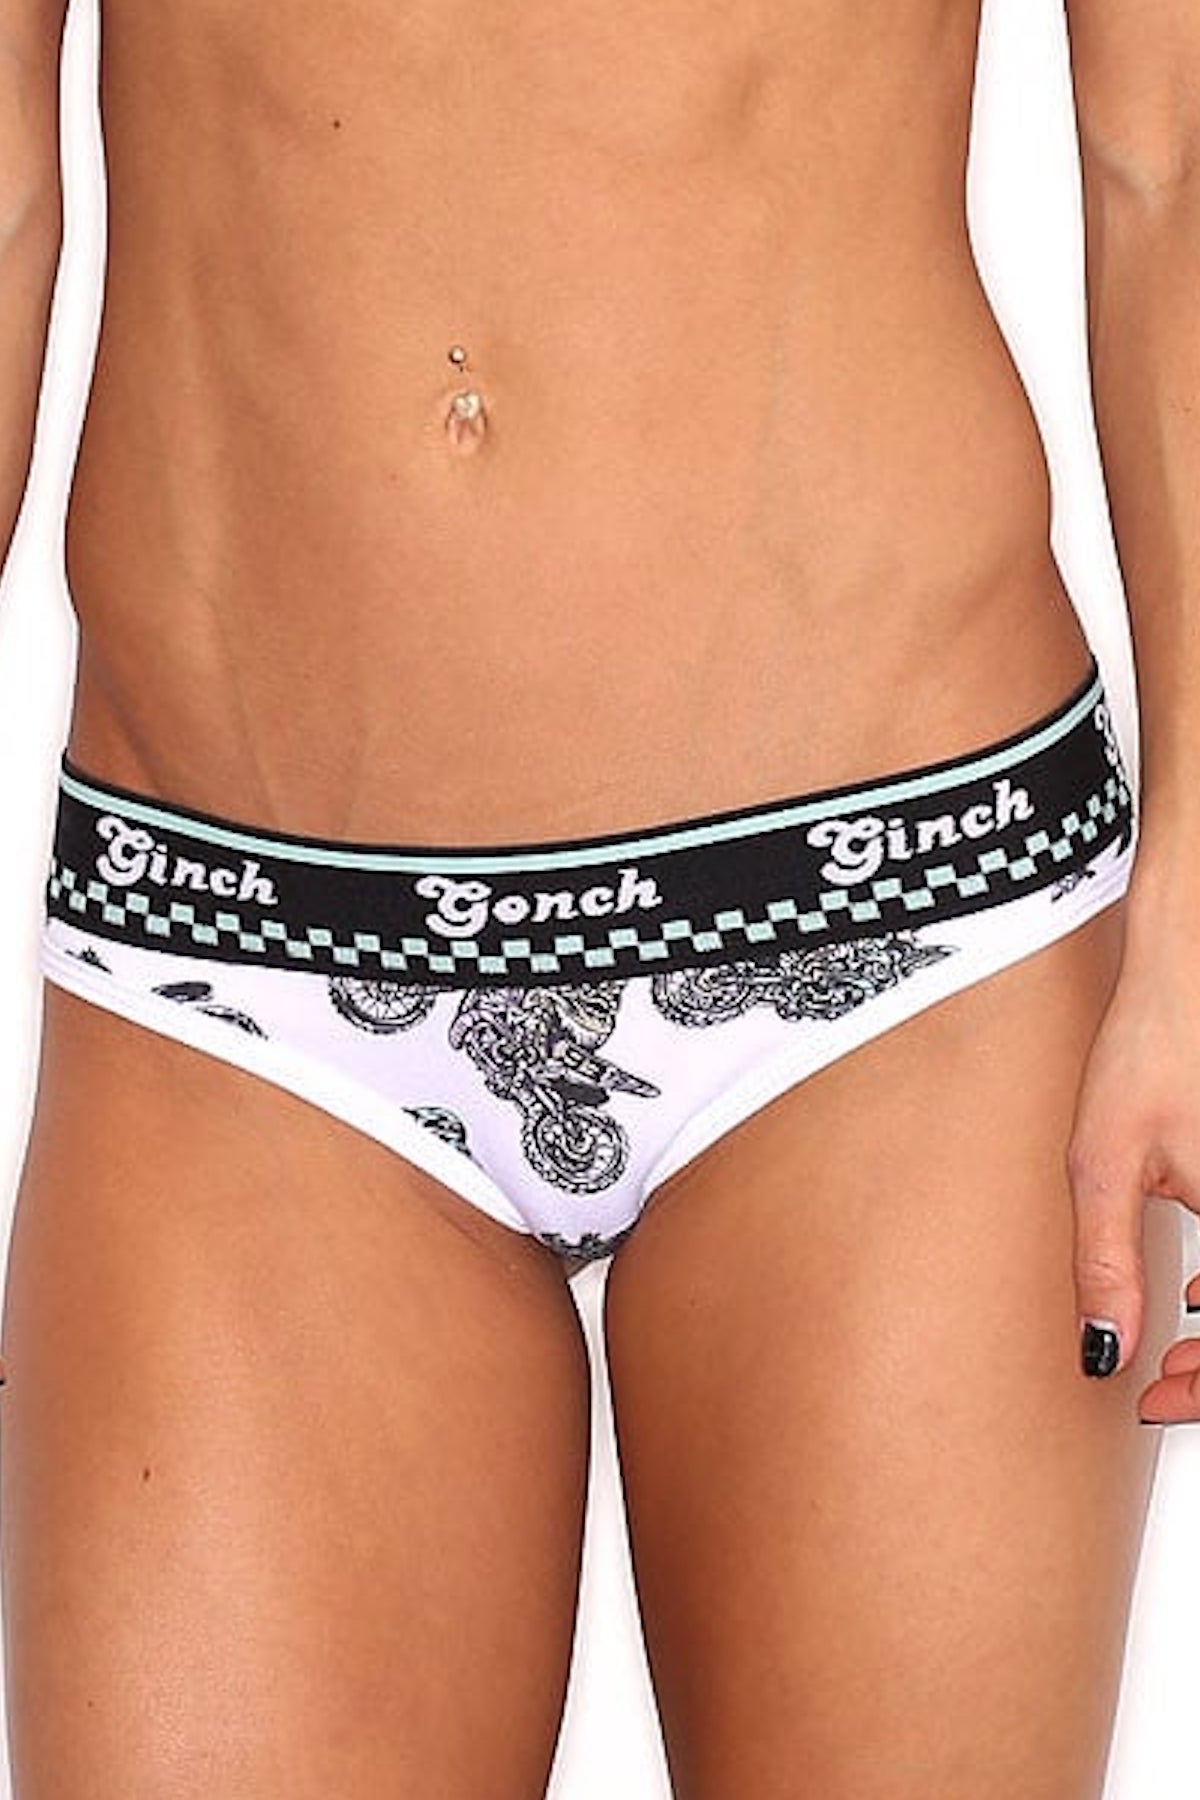 Ginch Gonch Ball Busters Thong